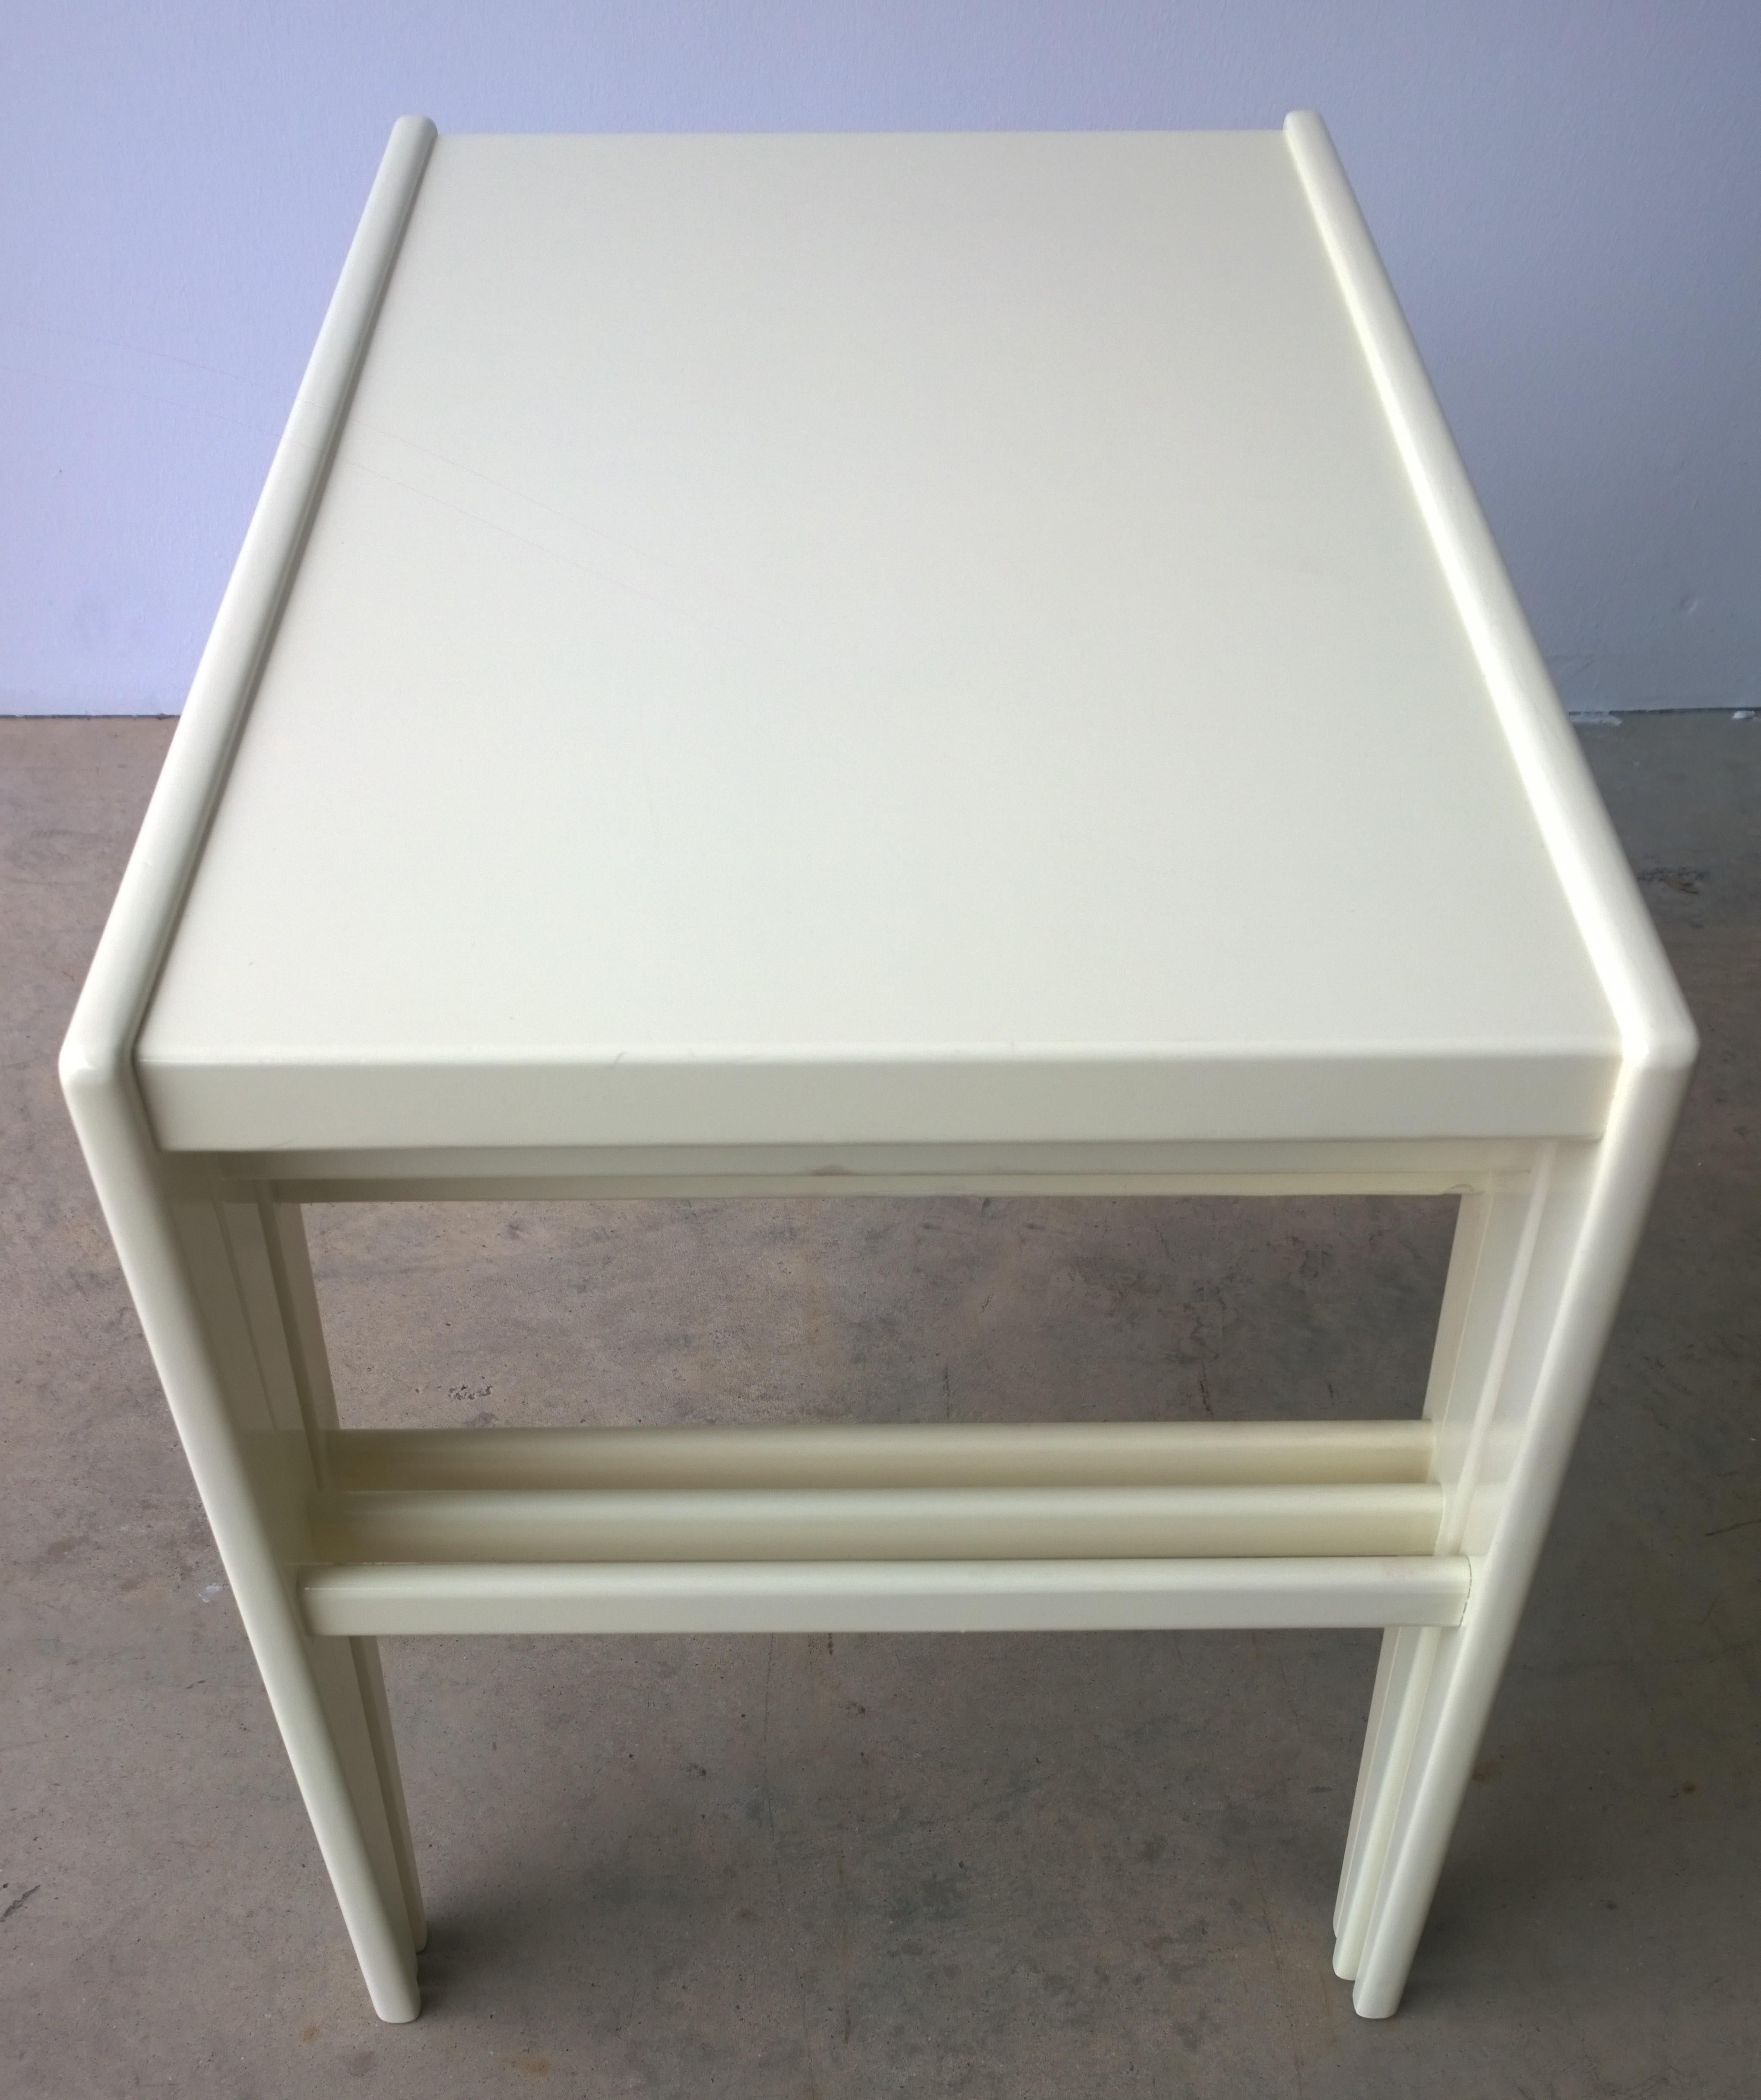 Ico Parisi / Singer & Son New Lacquer in Creamy White Wood S/3 Stacking Tables For Sale 2